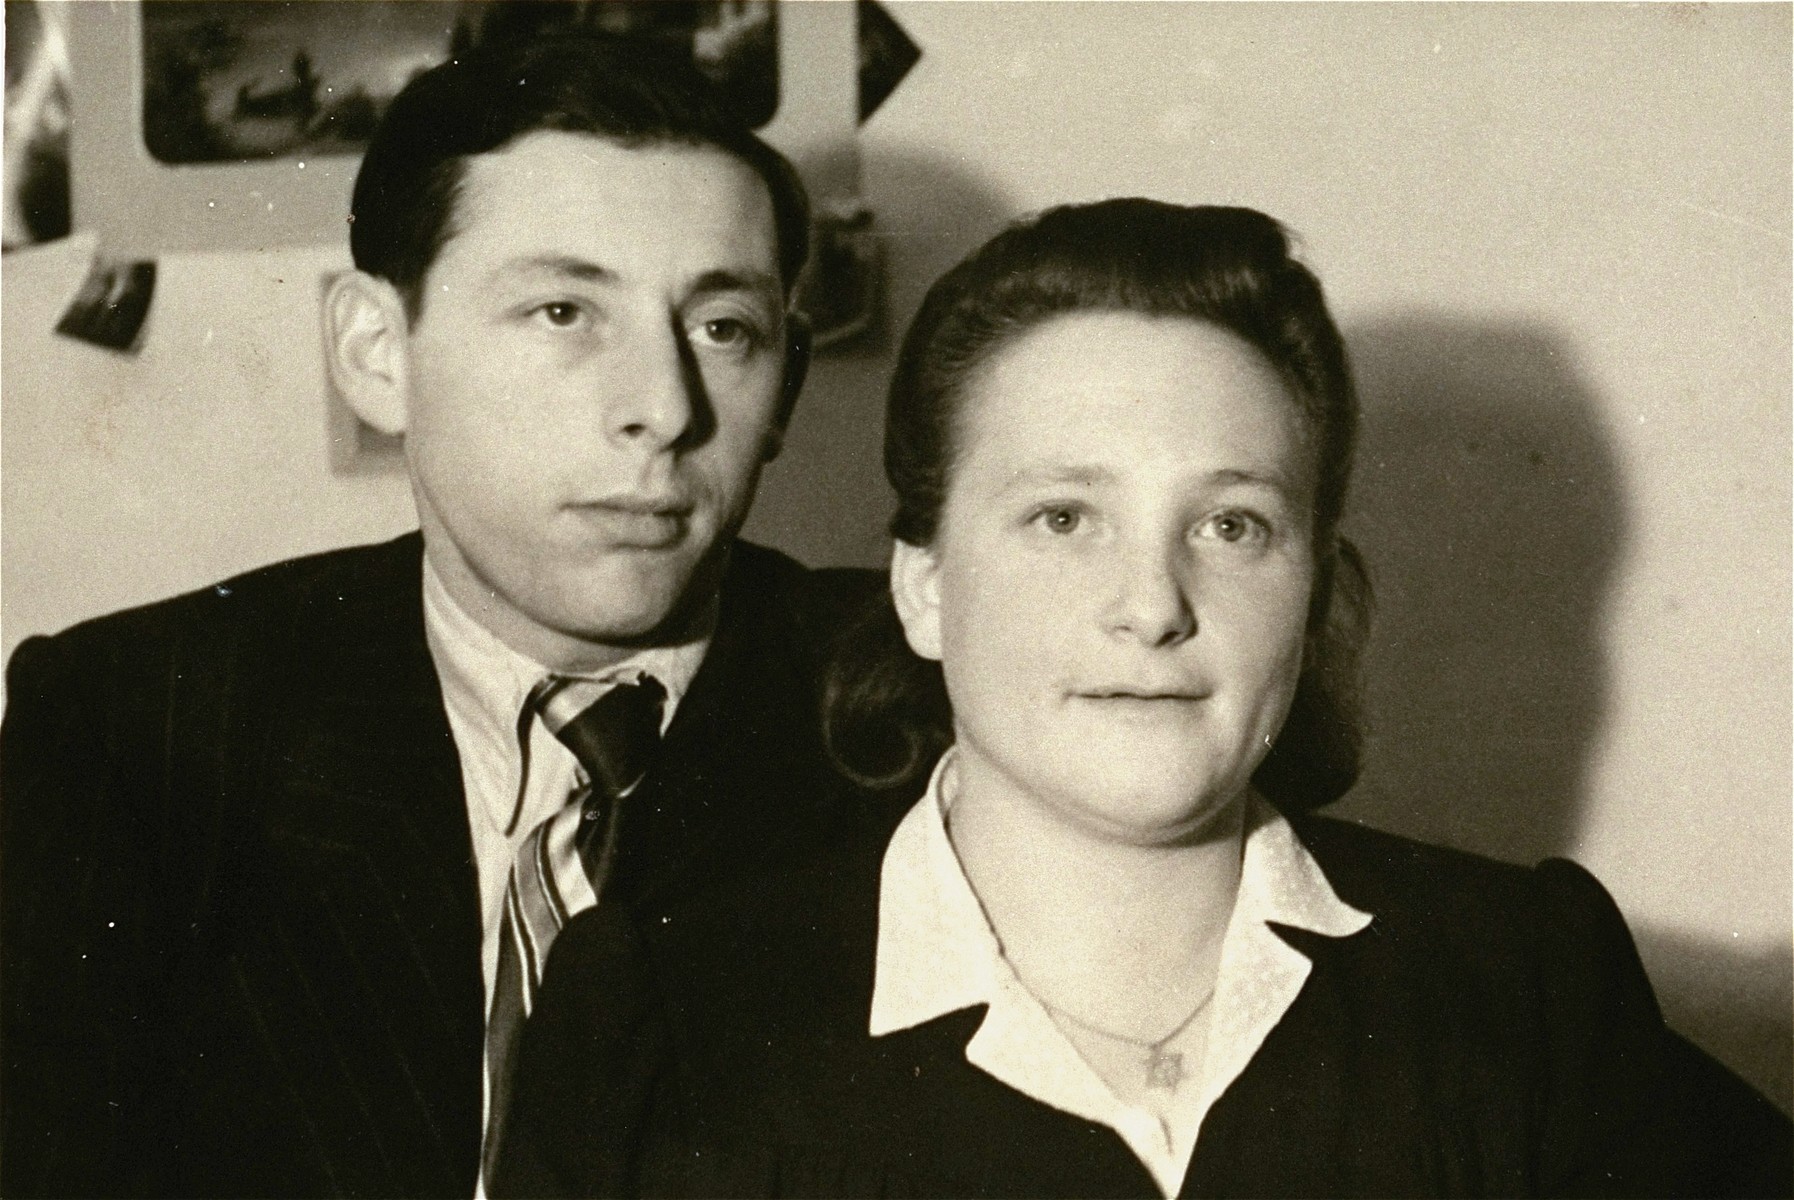 Portrait of the donor and his wife, Roman Sompolinski and Masza Kuropatwa Sompolinski in the Bergen-Belsen displaced persons' camp.